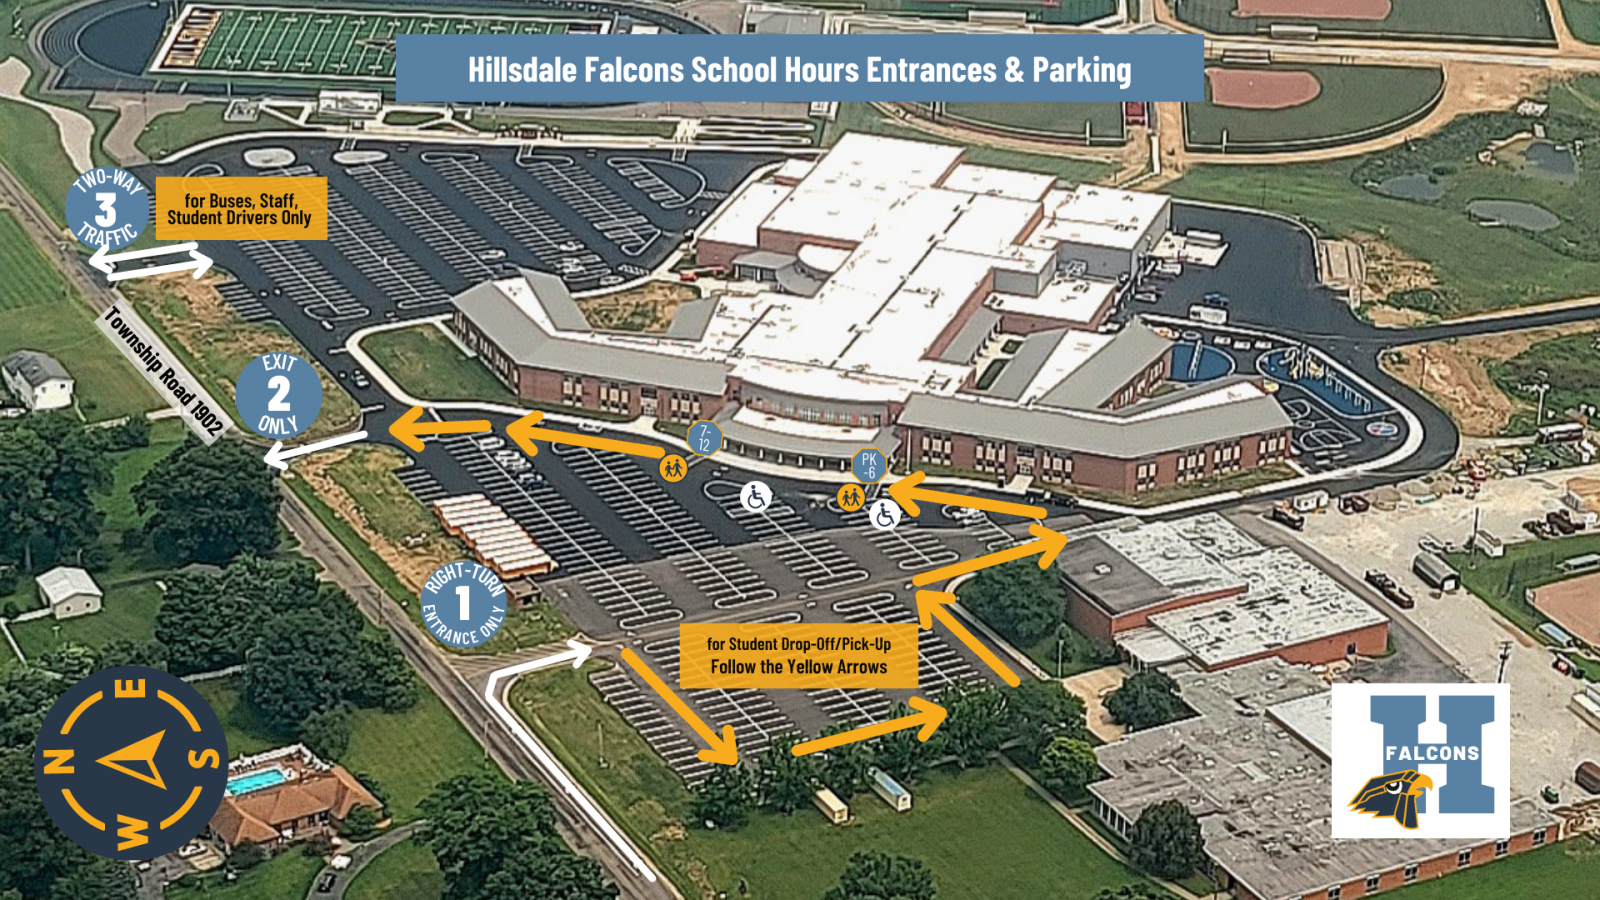 An image of the Hillsdale Local Schools campus, with markings for the traffic pattern.